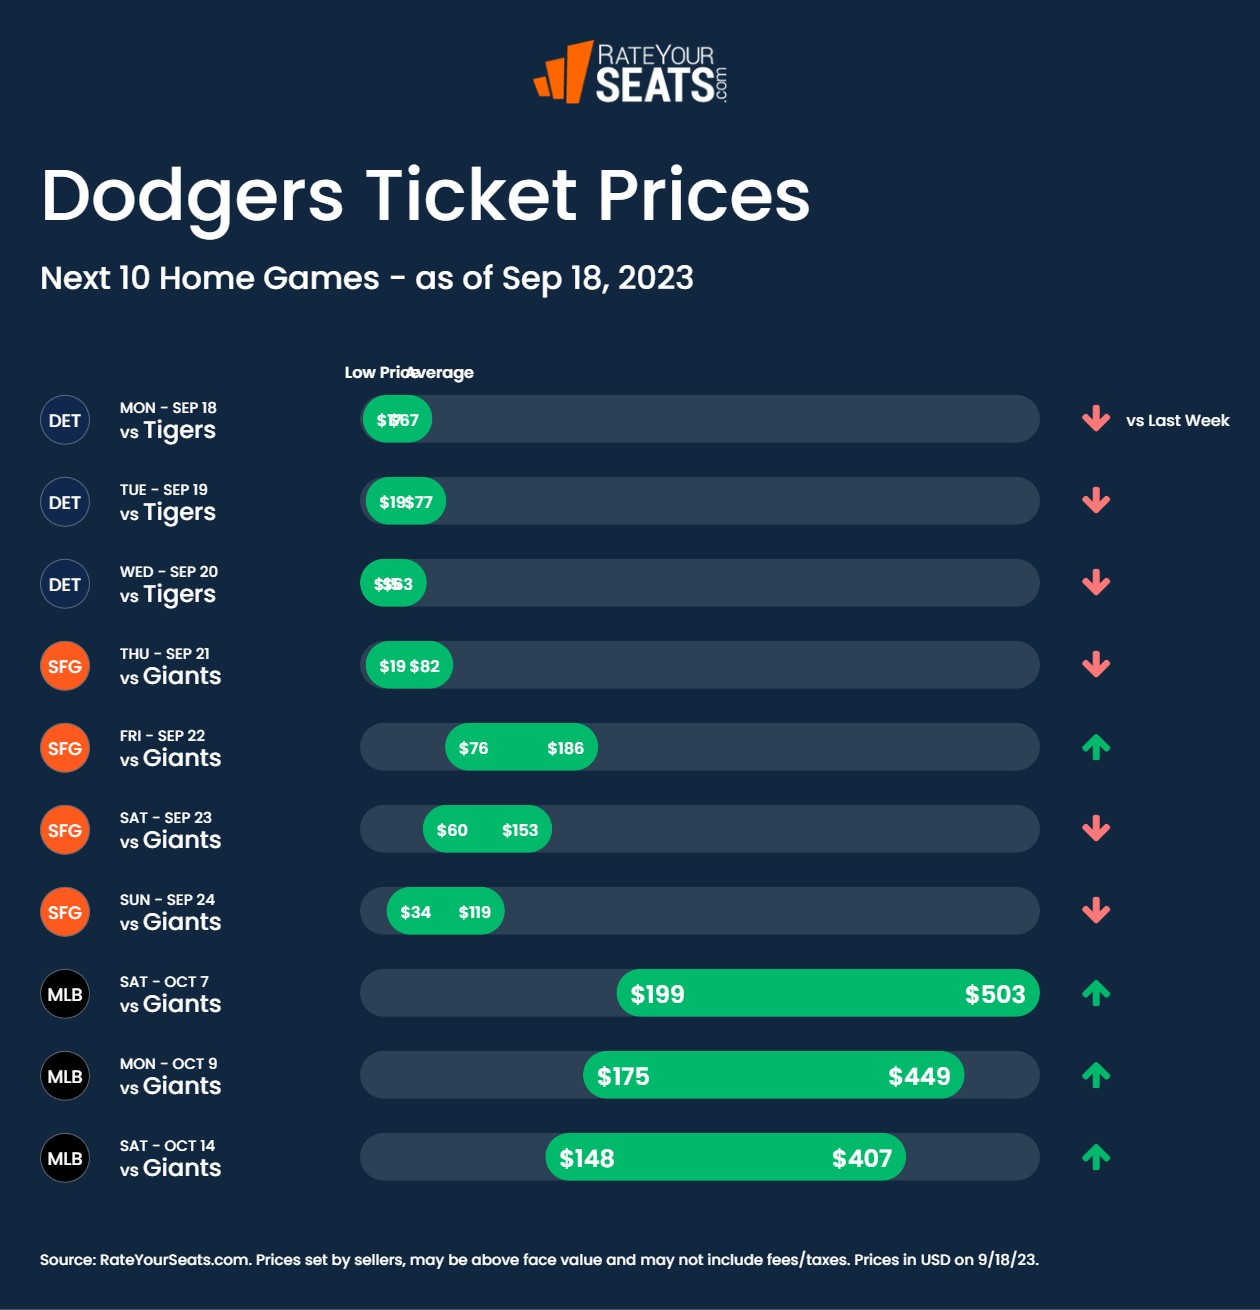 Dodgers tickets pricing week of September 18 2023